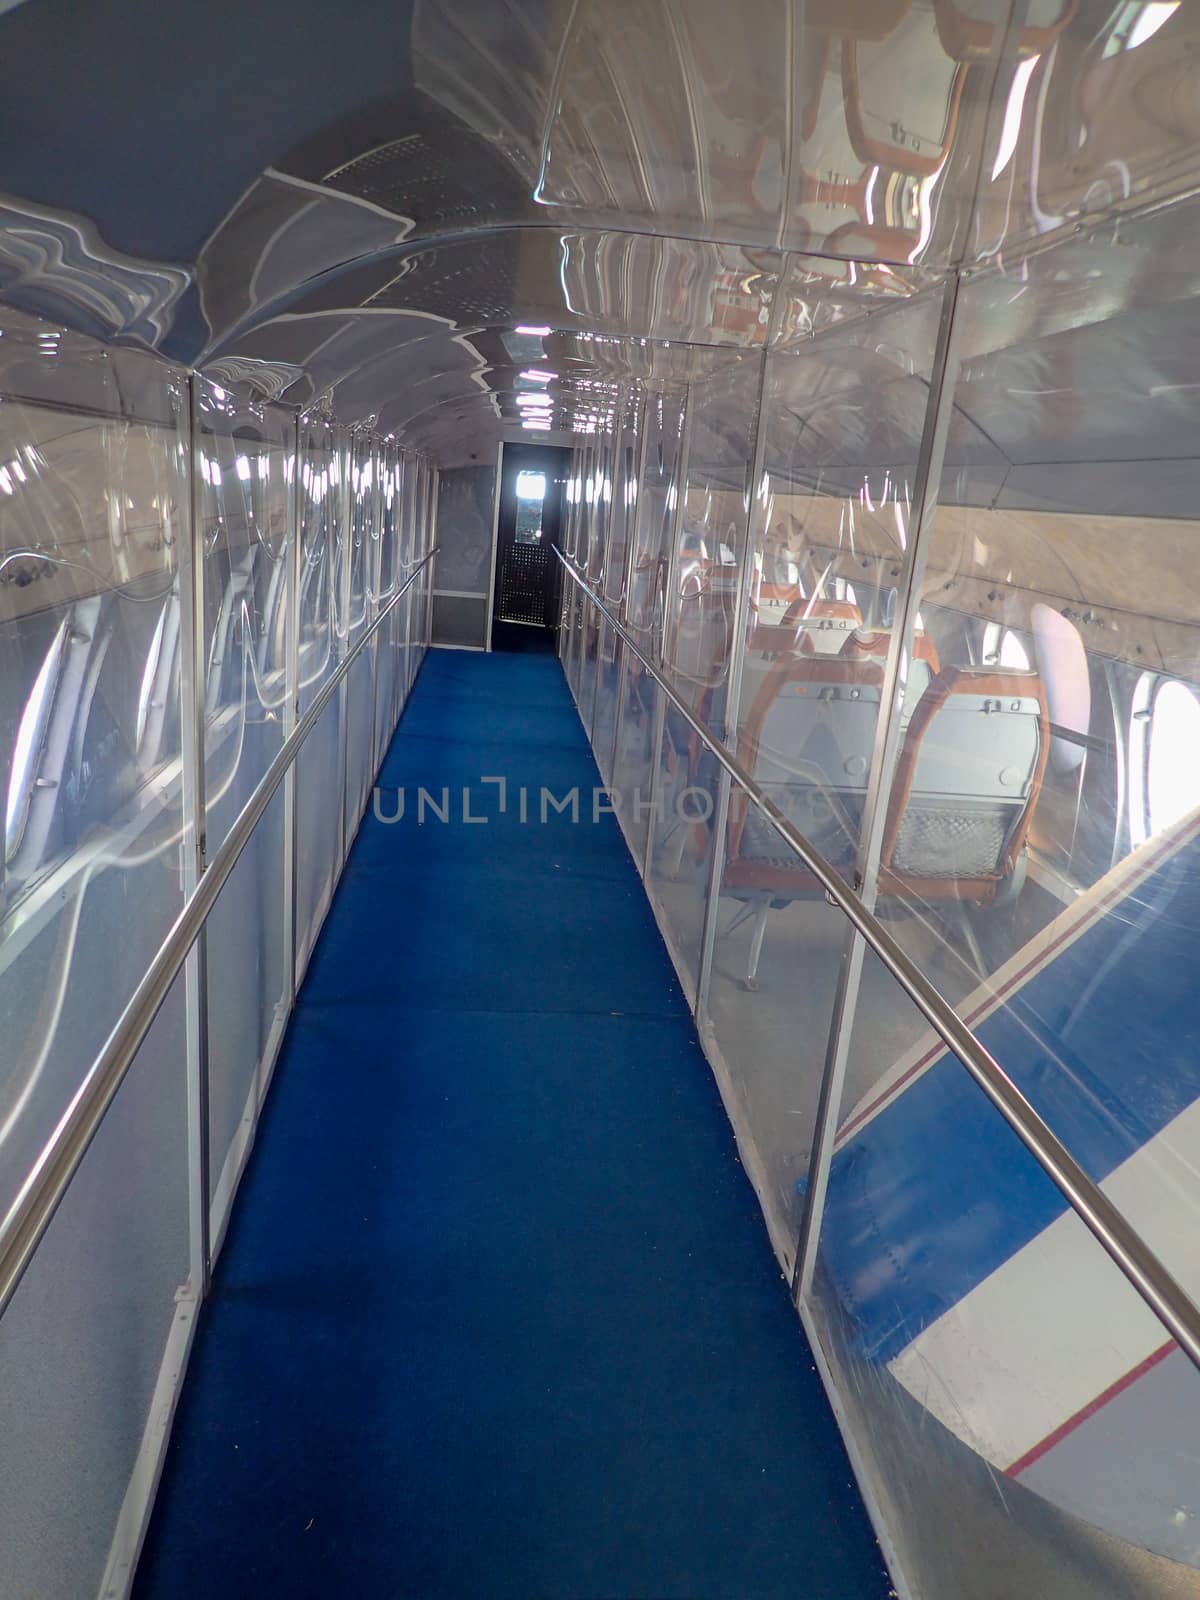 inside the concorde at the museum by Tevion25